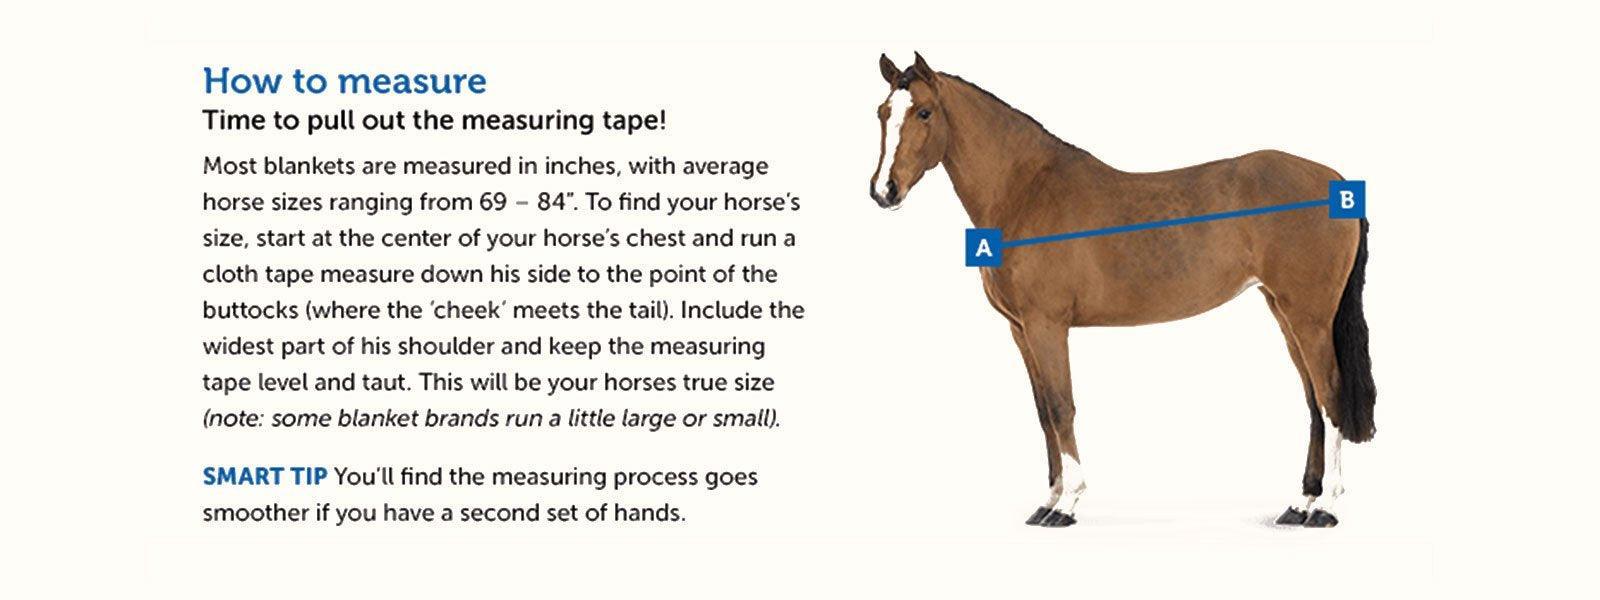 How To Measure Your Horse 